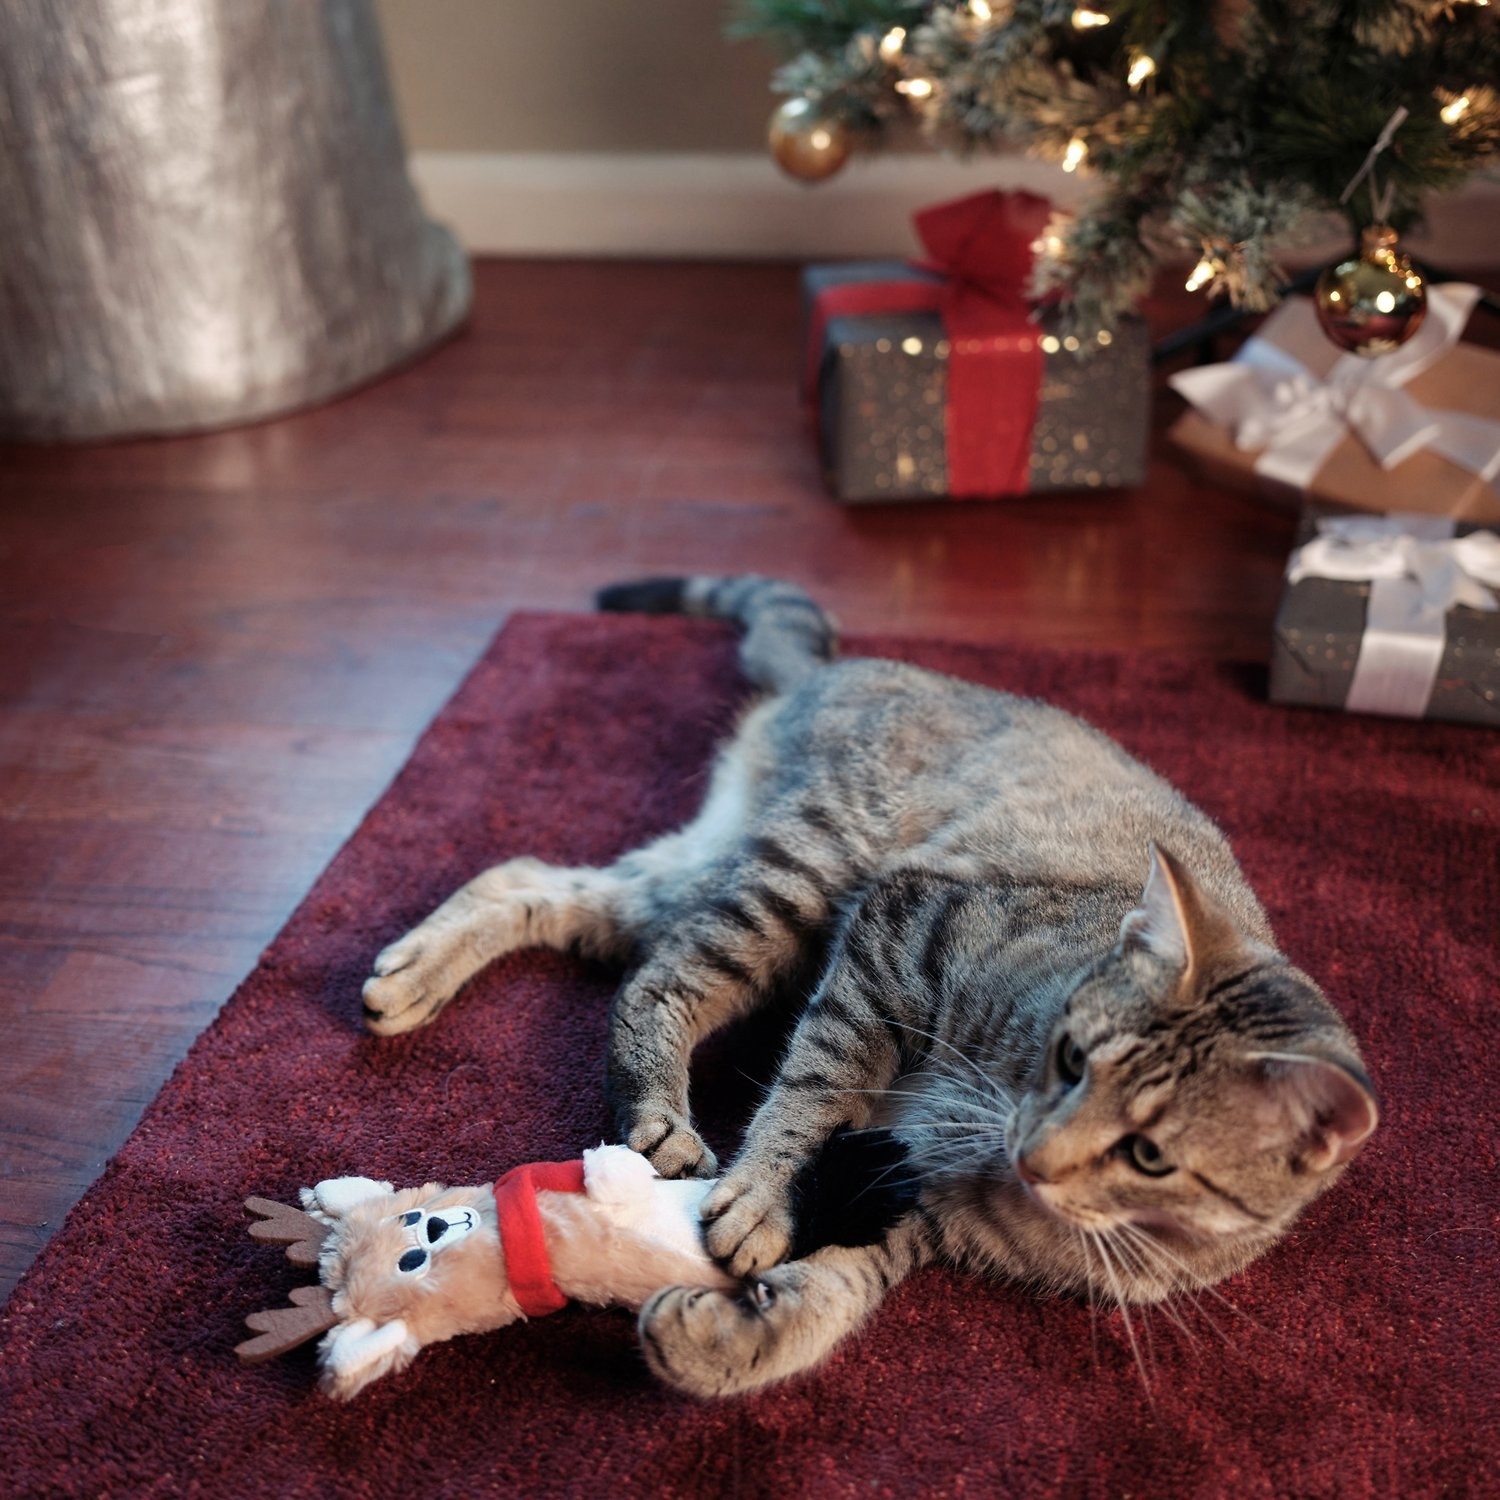 A cat playing with a reindeer plush toy.